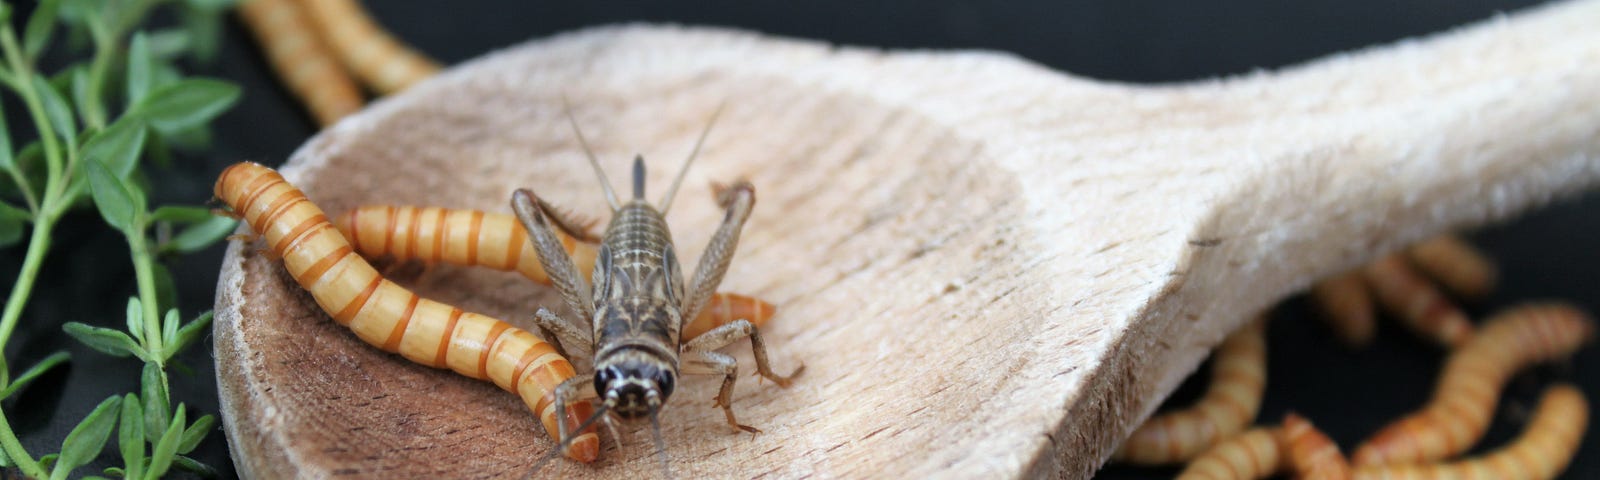 Mealworm and locust on a wooden spoon.